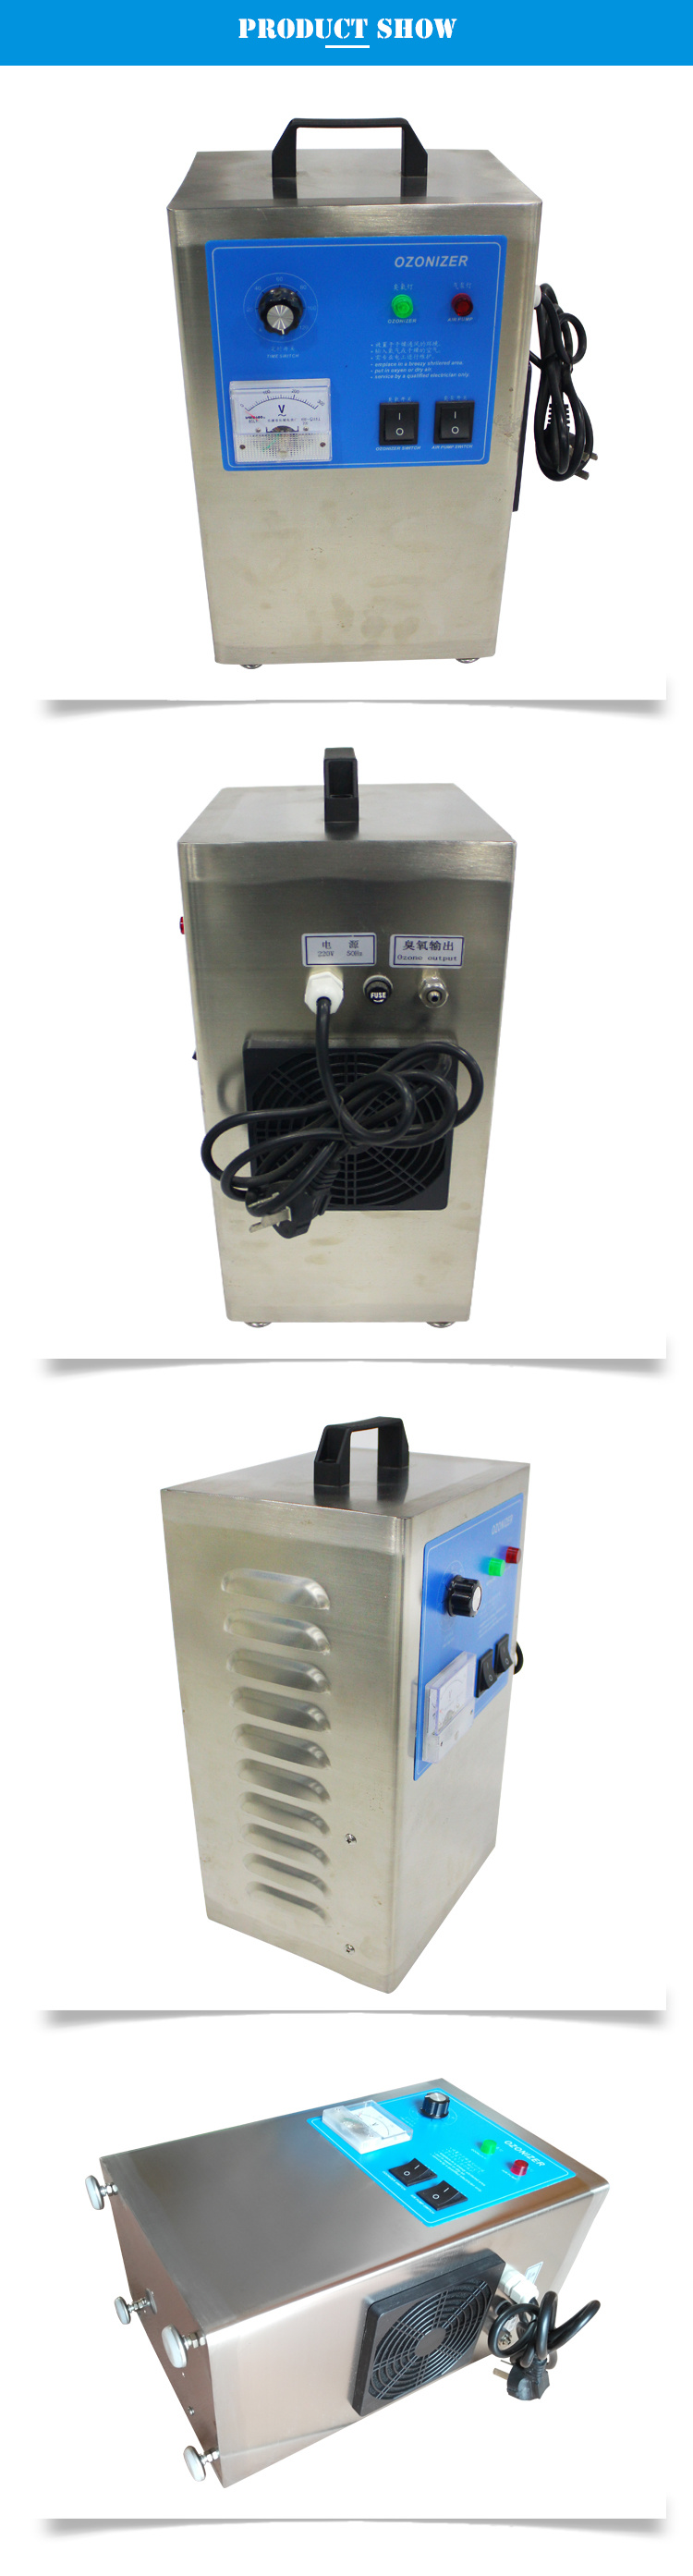 Swimming Pool Disinfection System